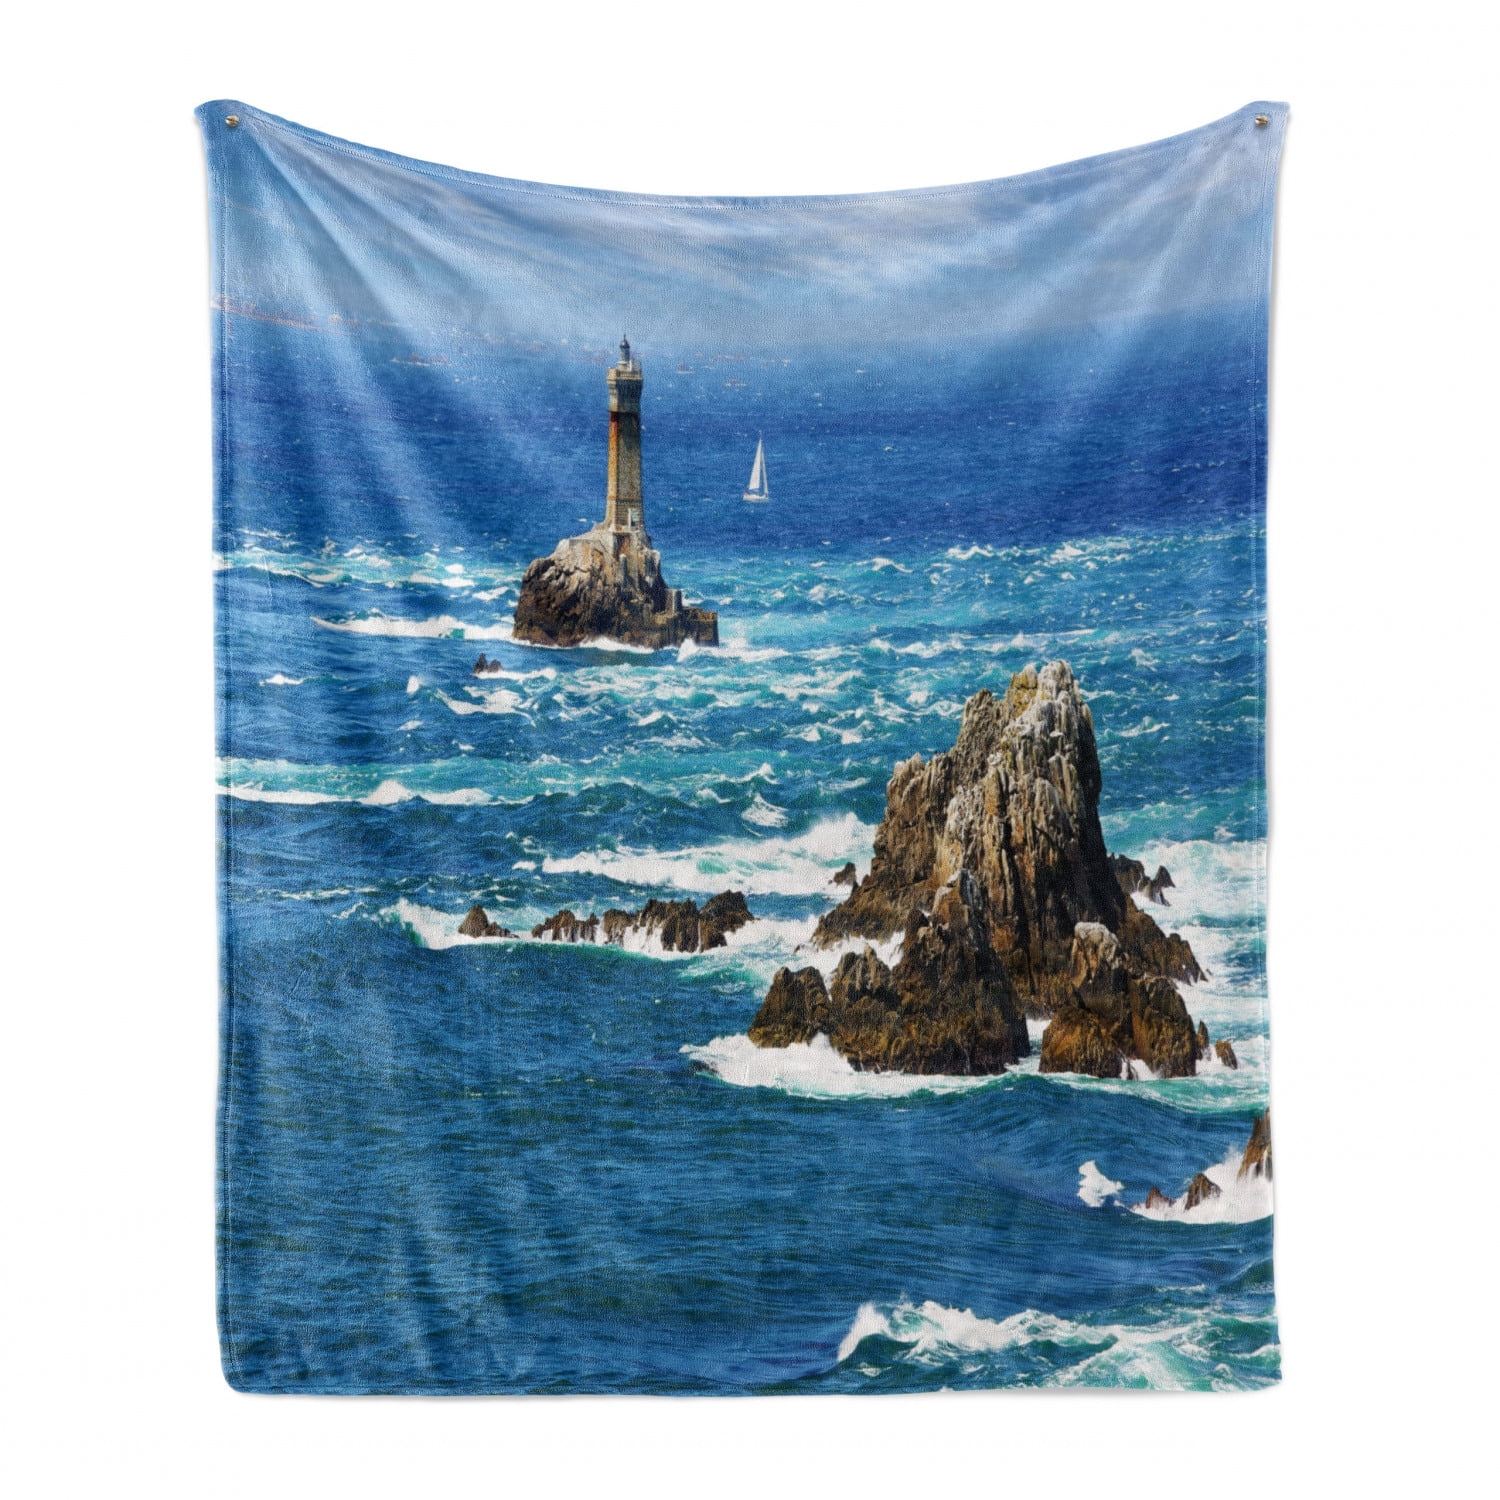 Ambesonne Ocean Soft Flannel Fleece Throw Blanket Surreal Tropical Seascape with Dreamy Sea and Sky Paradise Coast Hawaiian Art Cozy Plush for Indoor and Outdoor Use Turquoise White 50 x 70